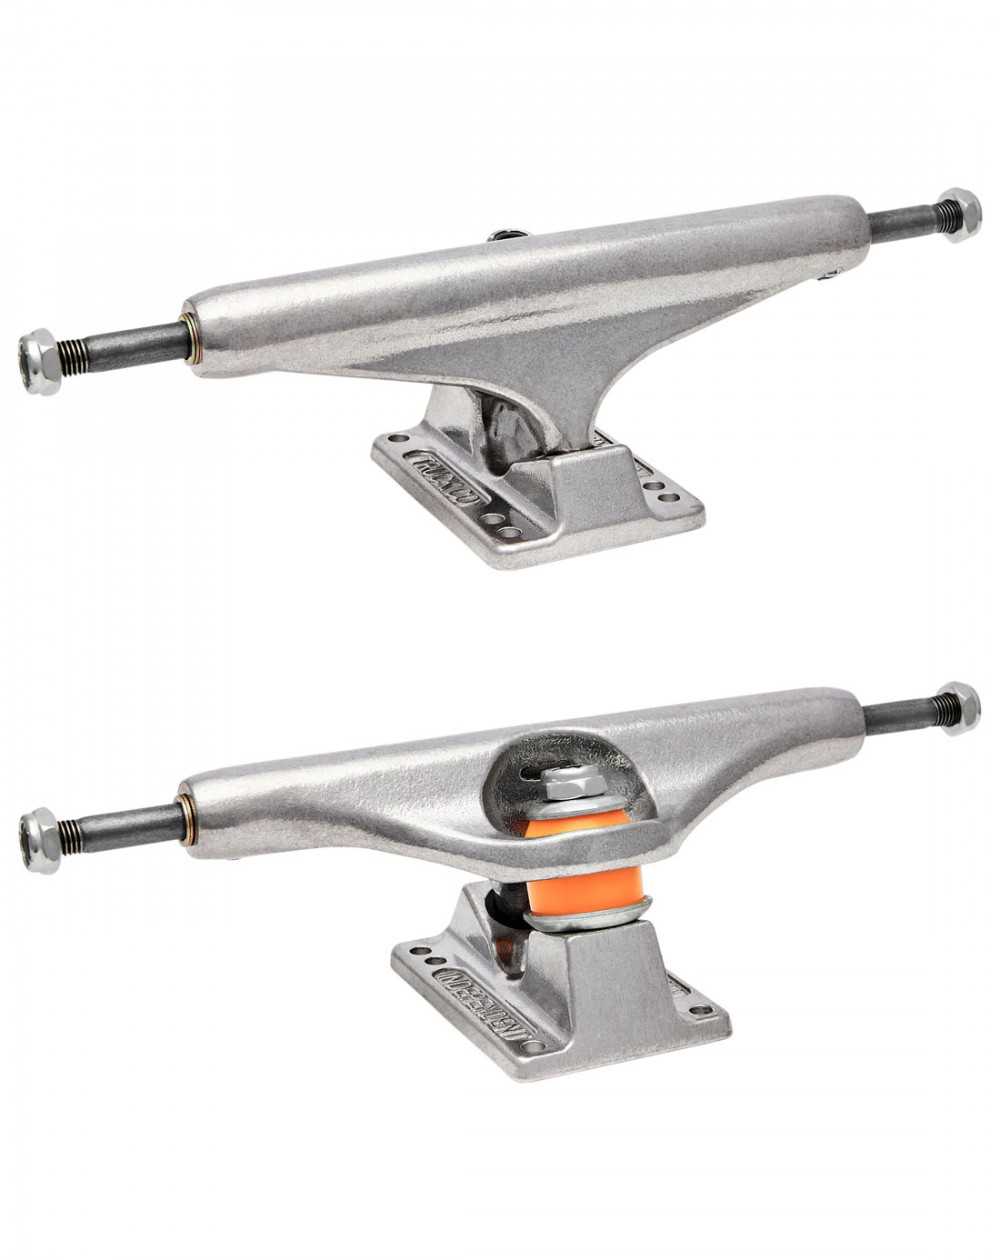 Independent Stage XI Standard 169mm Skateboard Trucks pack of 2